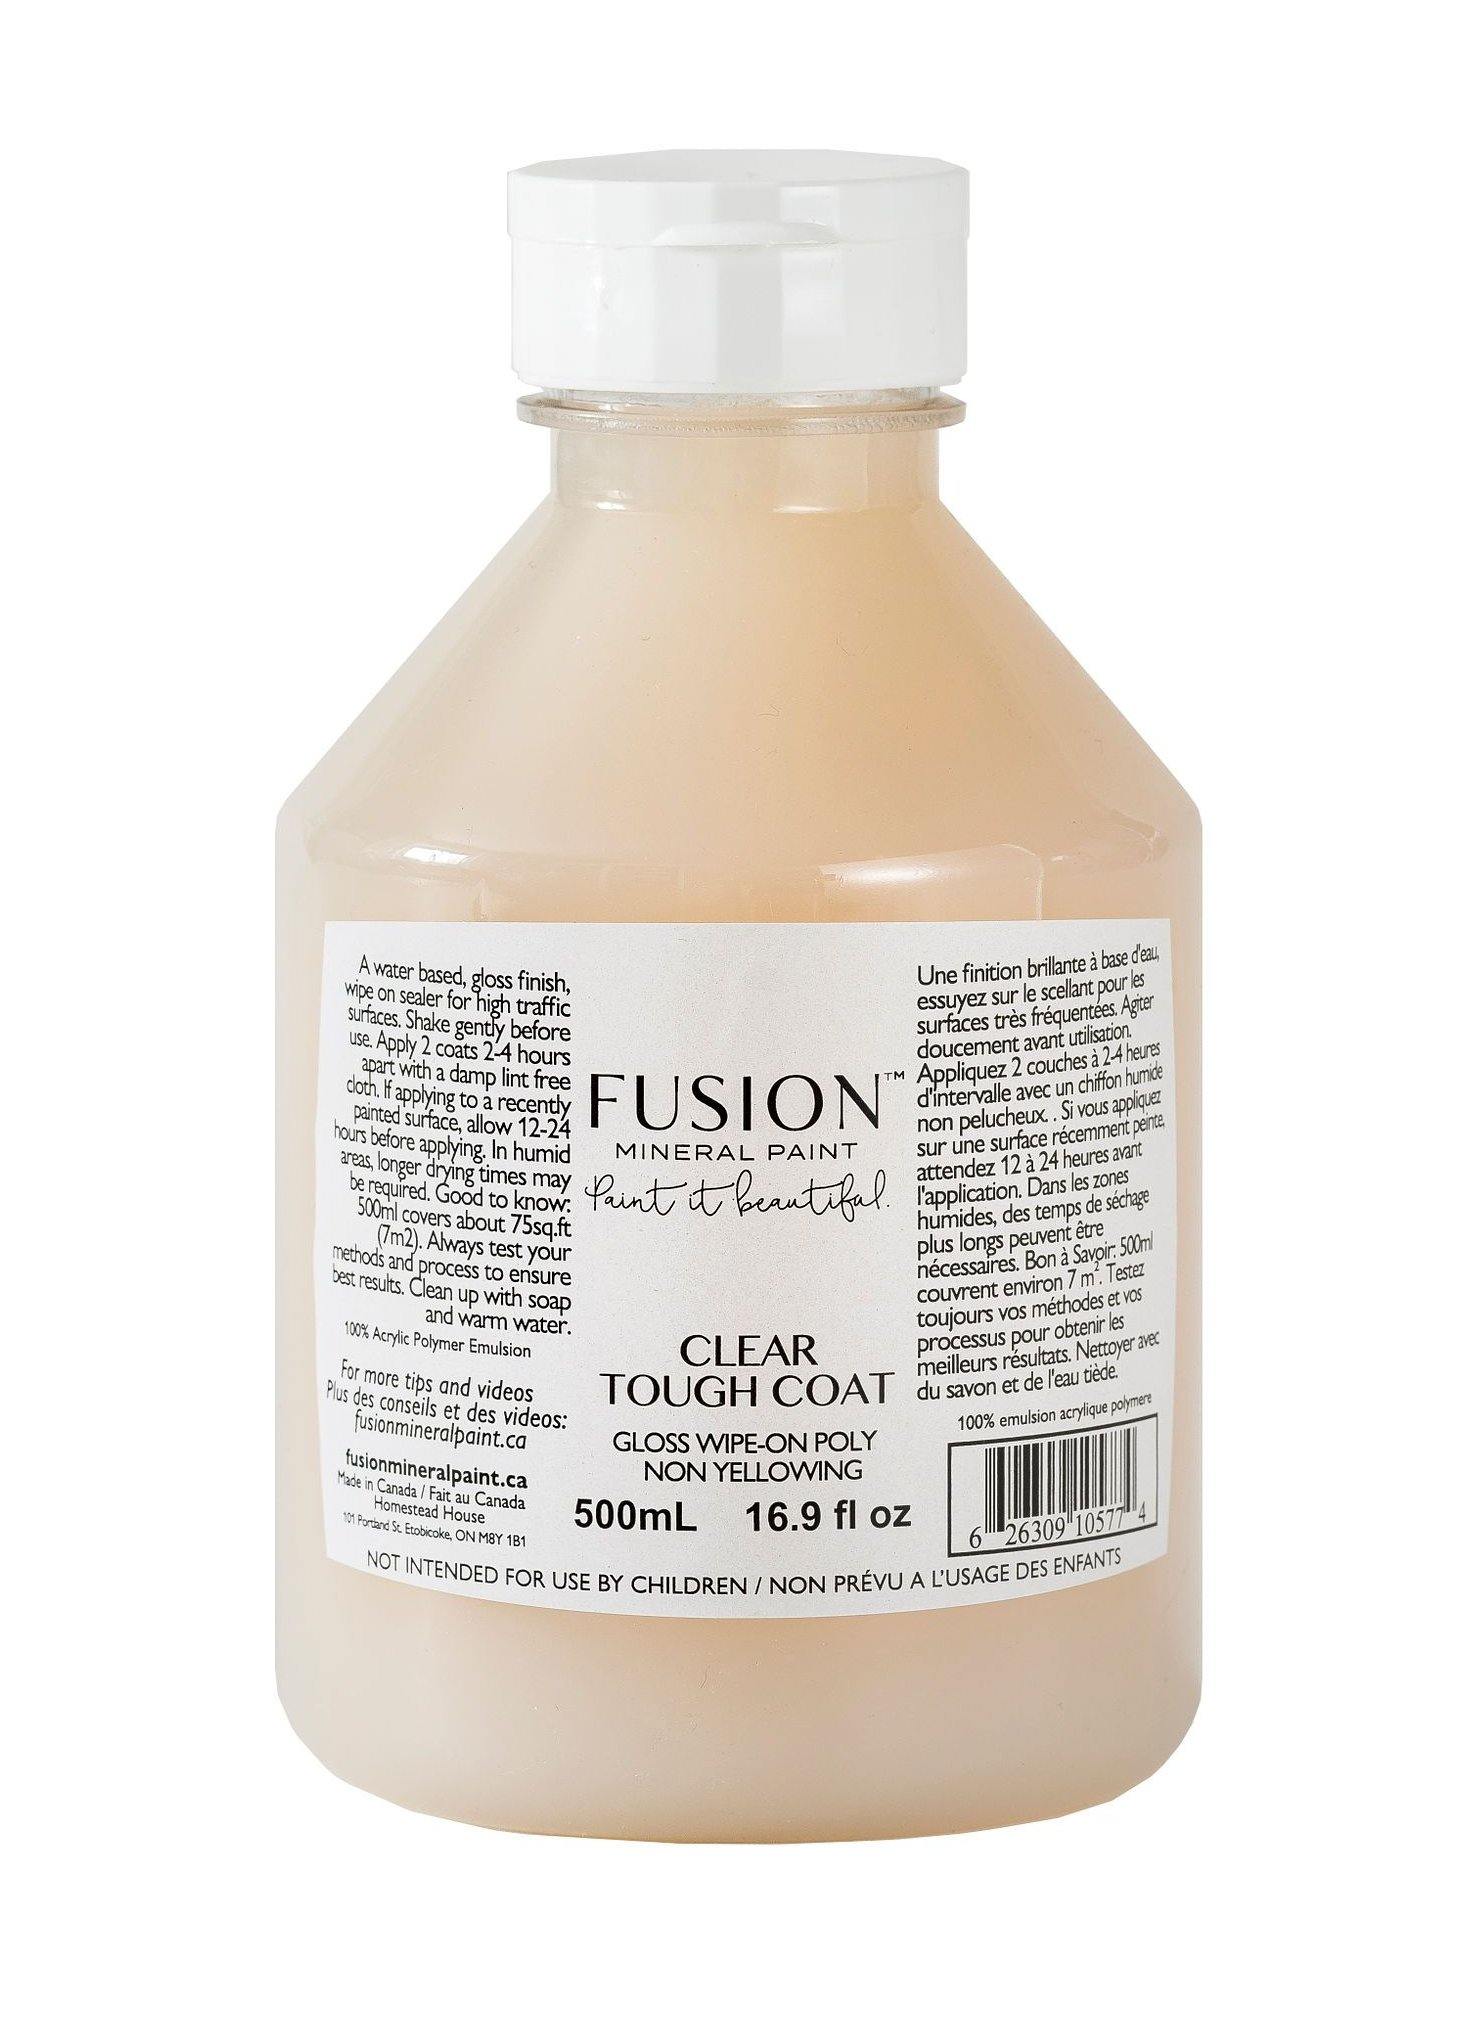 Fusion Mineral Paint Gloss Toughcoat